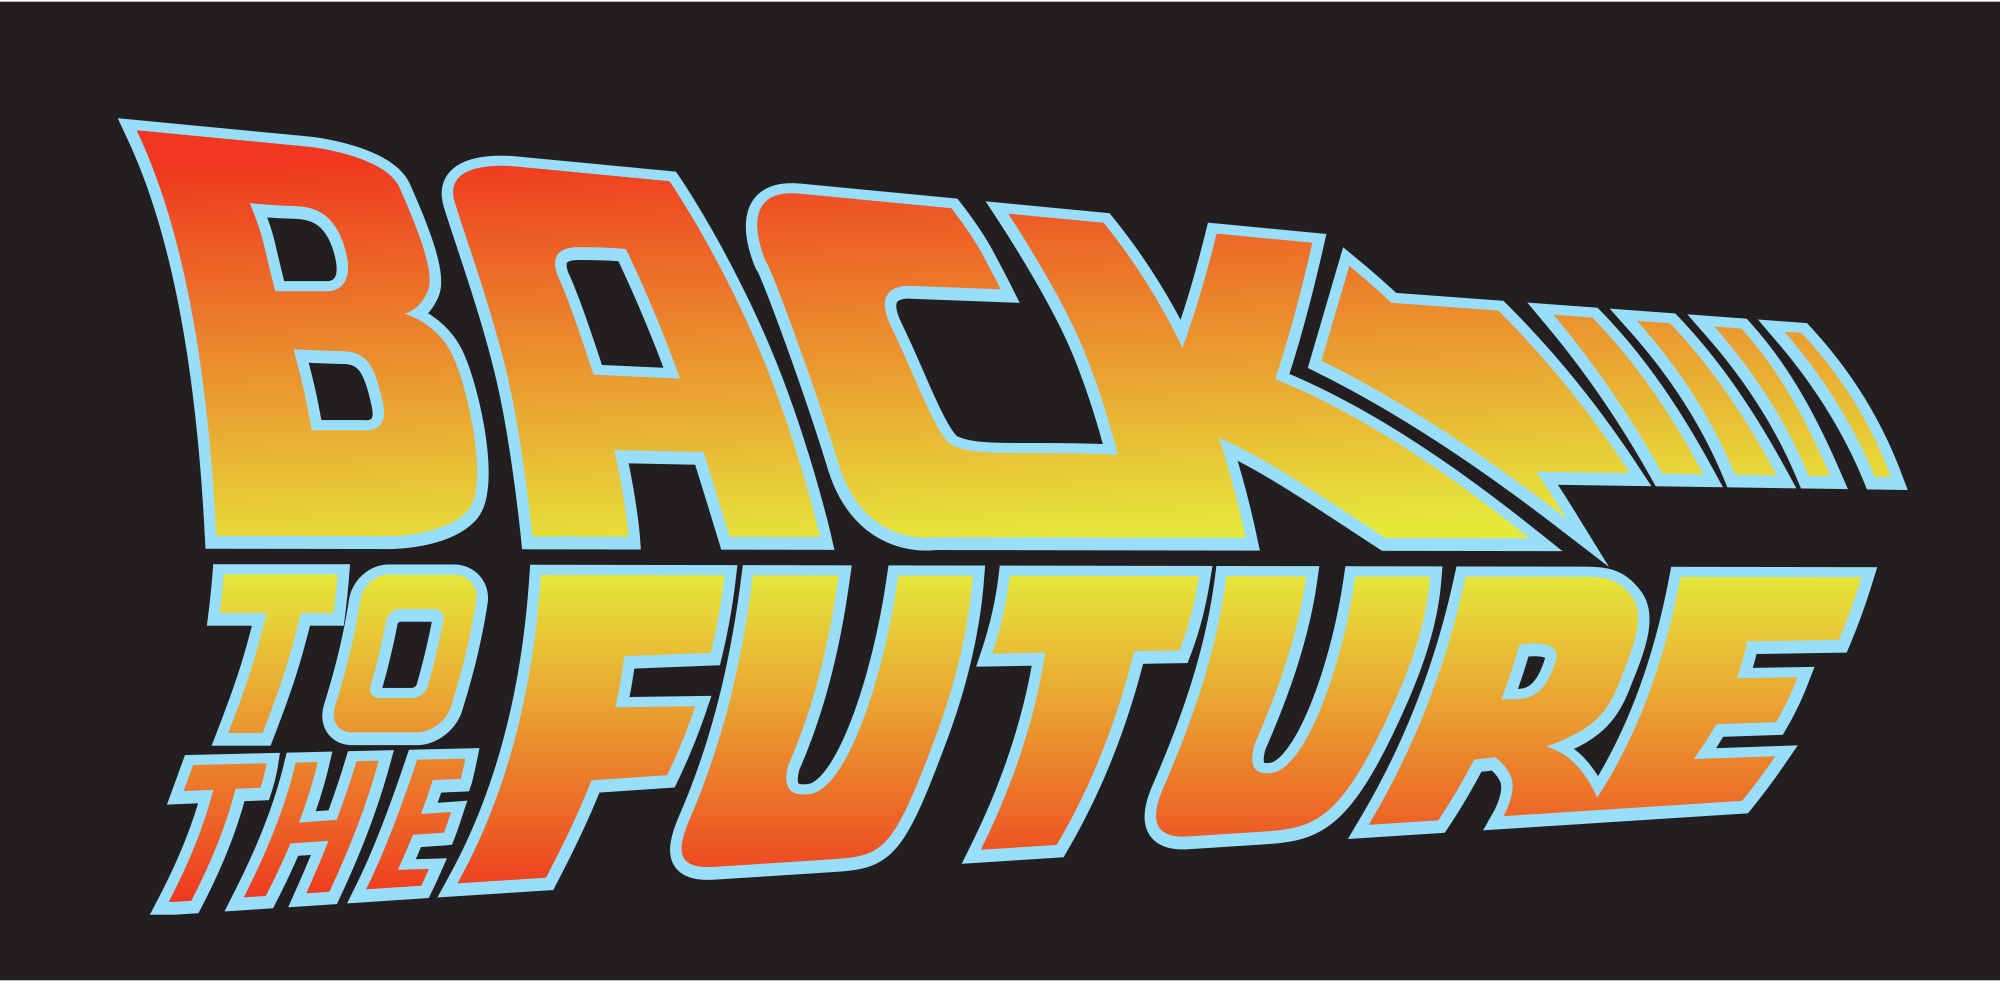 2000px-Back-to-the-future-logo.svg